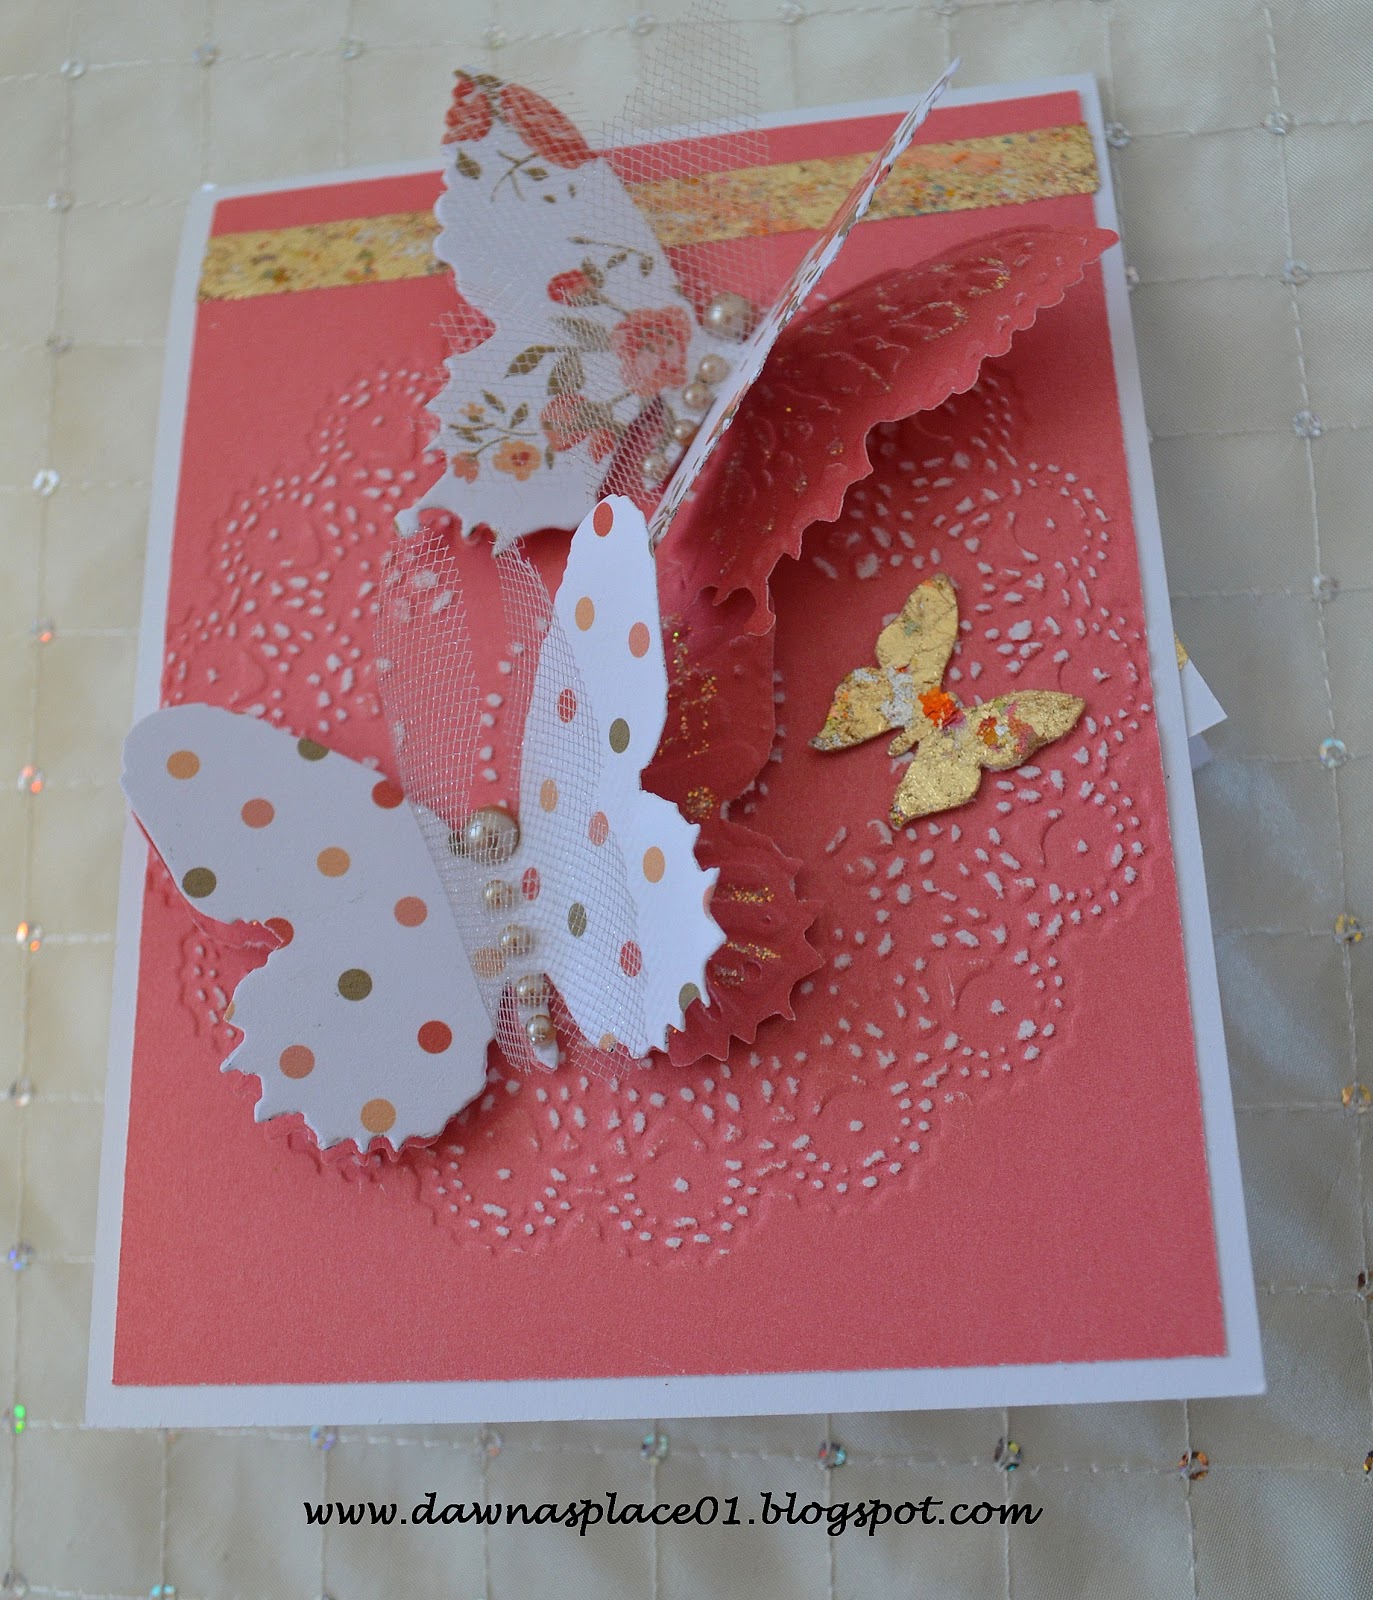 dawna-s-place-butterfly-birthday-card